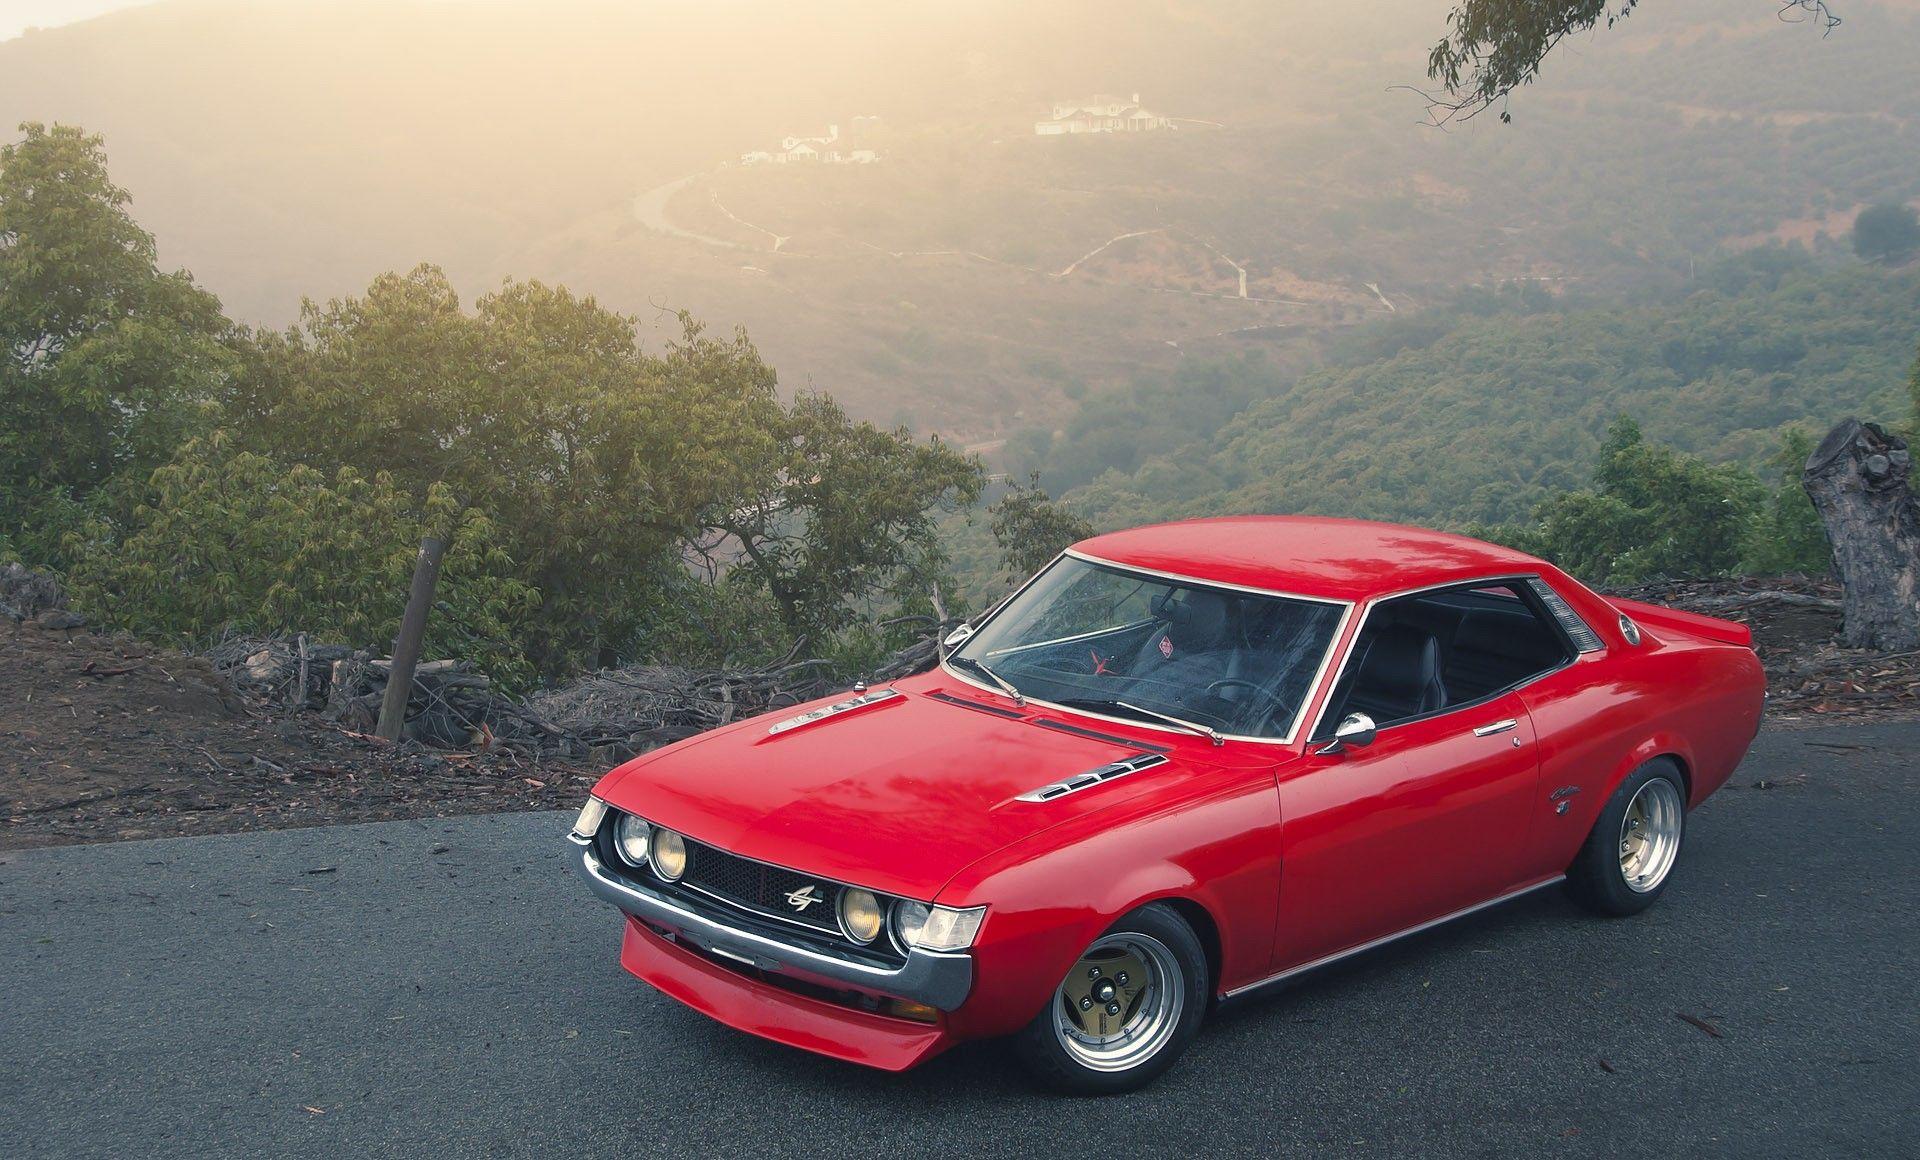 cars, trees, Toyota Celica, old cars, vehicles, Toyota wallpaper